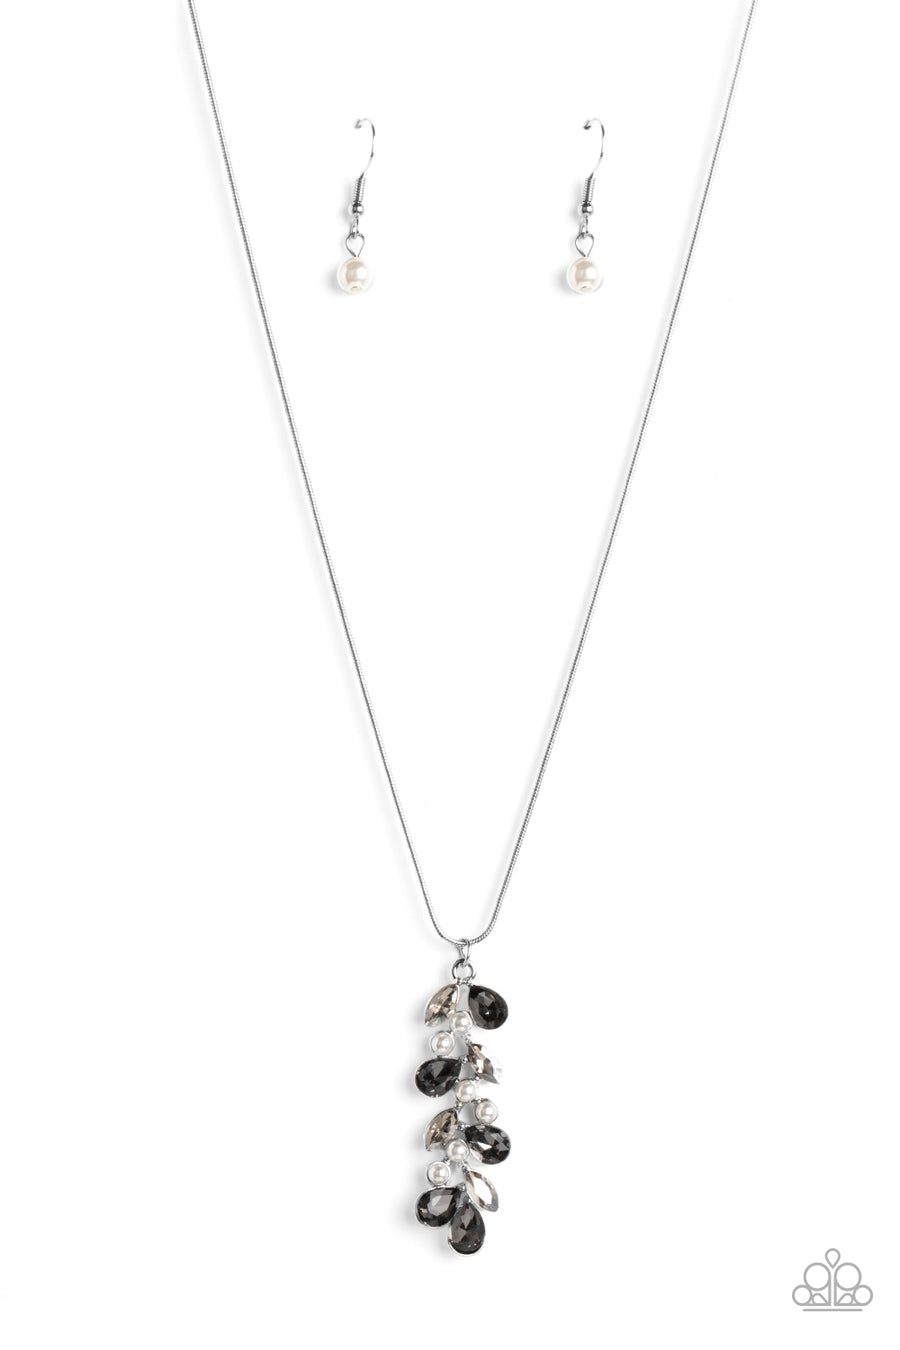 Pearls Before VINE - Silver Necklace - Paparazzi Accessories - Dainty faceted jet black teardrops- and smoky marquise-cut gems climb around clusters of dainty white half-pearls, creating an elongated pendant that slides elegantly along a skinny silver snake chain.